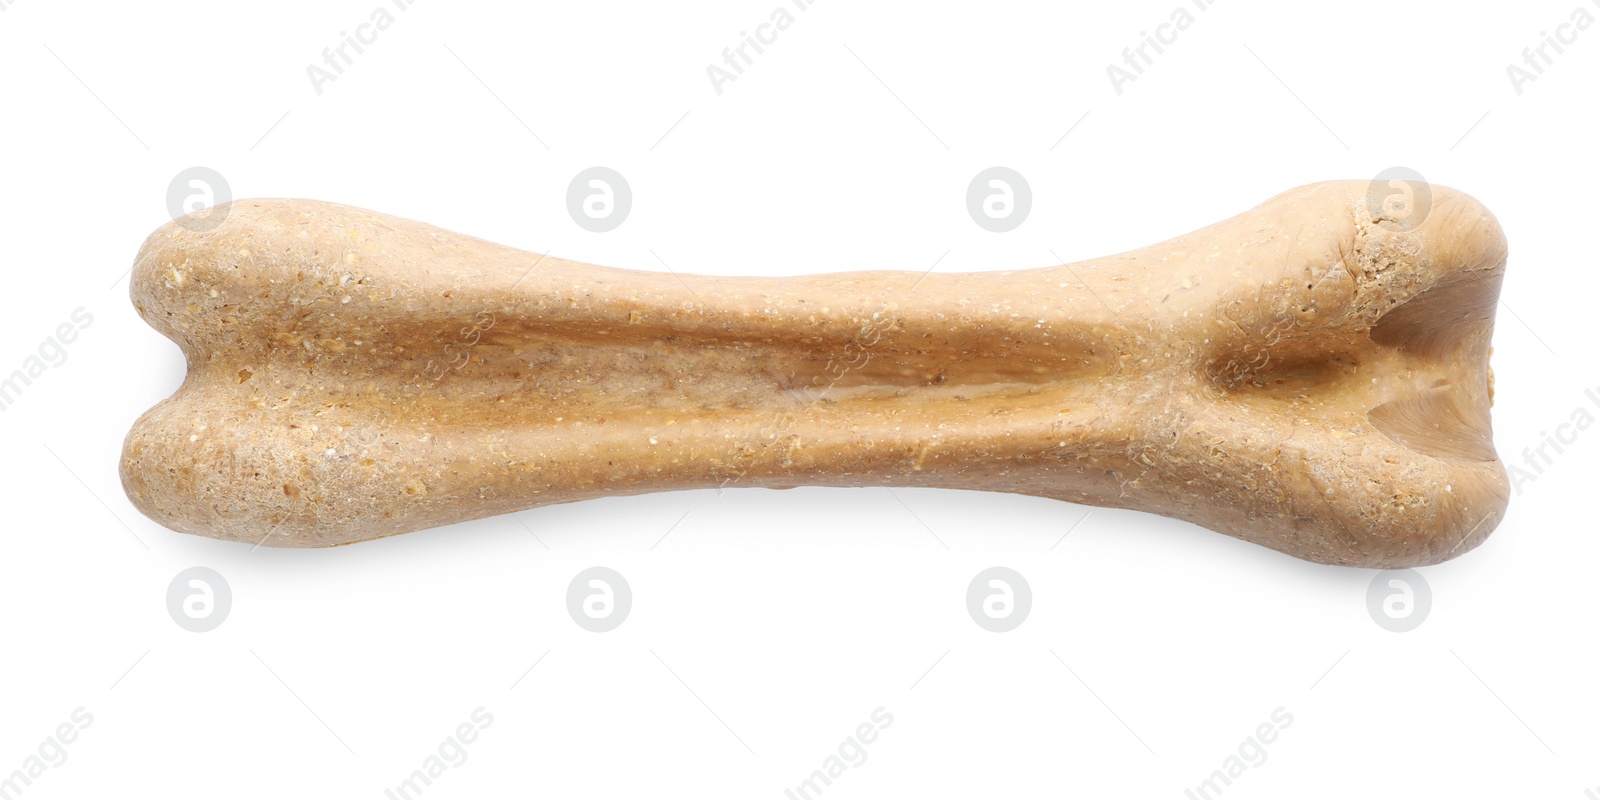 Photo of Chew bone for dog on white background. Pet care